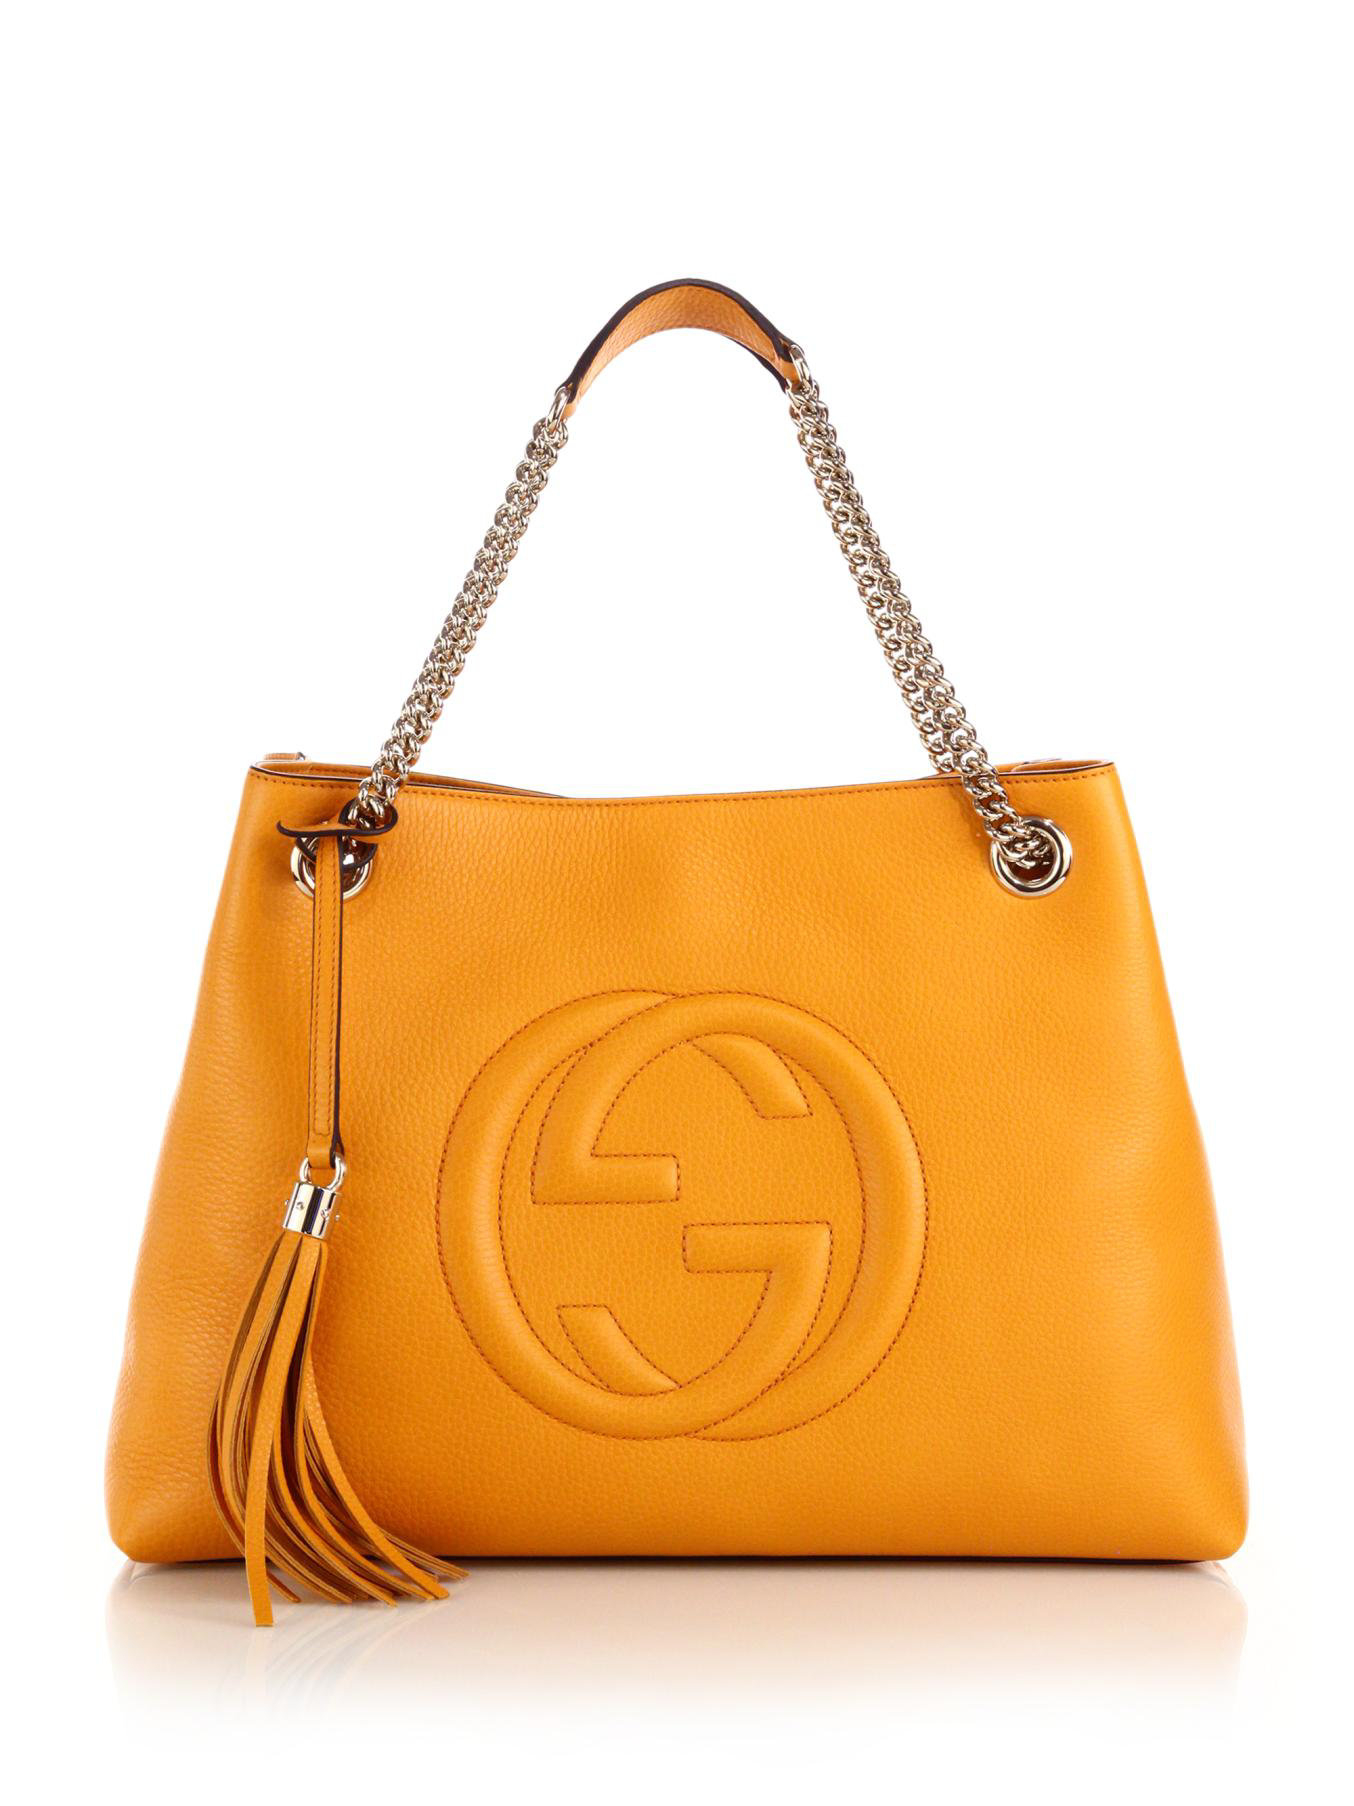 Gucci Soho Leather Shoulder Bag in Yellow (mustard) | Lyst